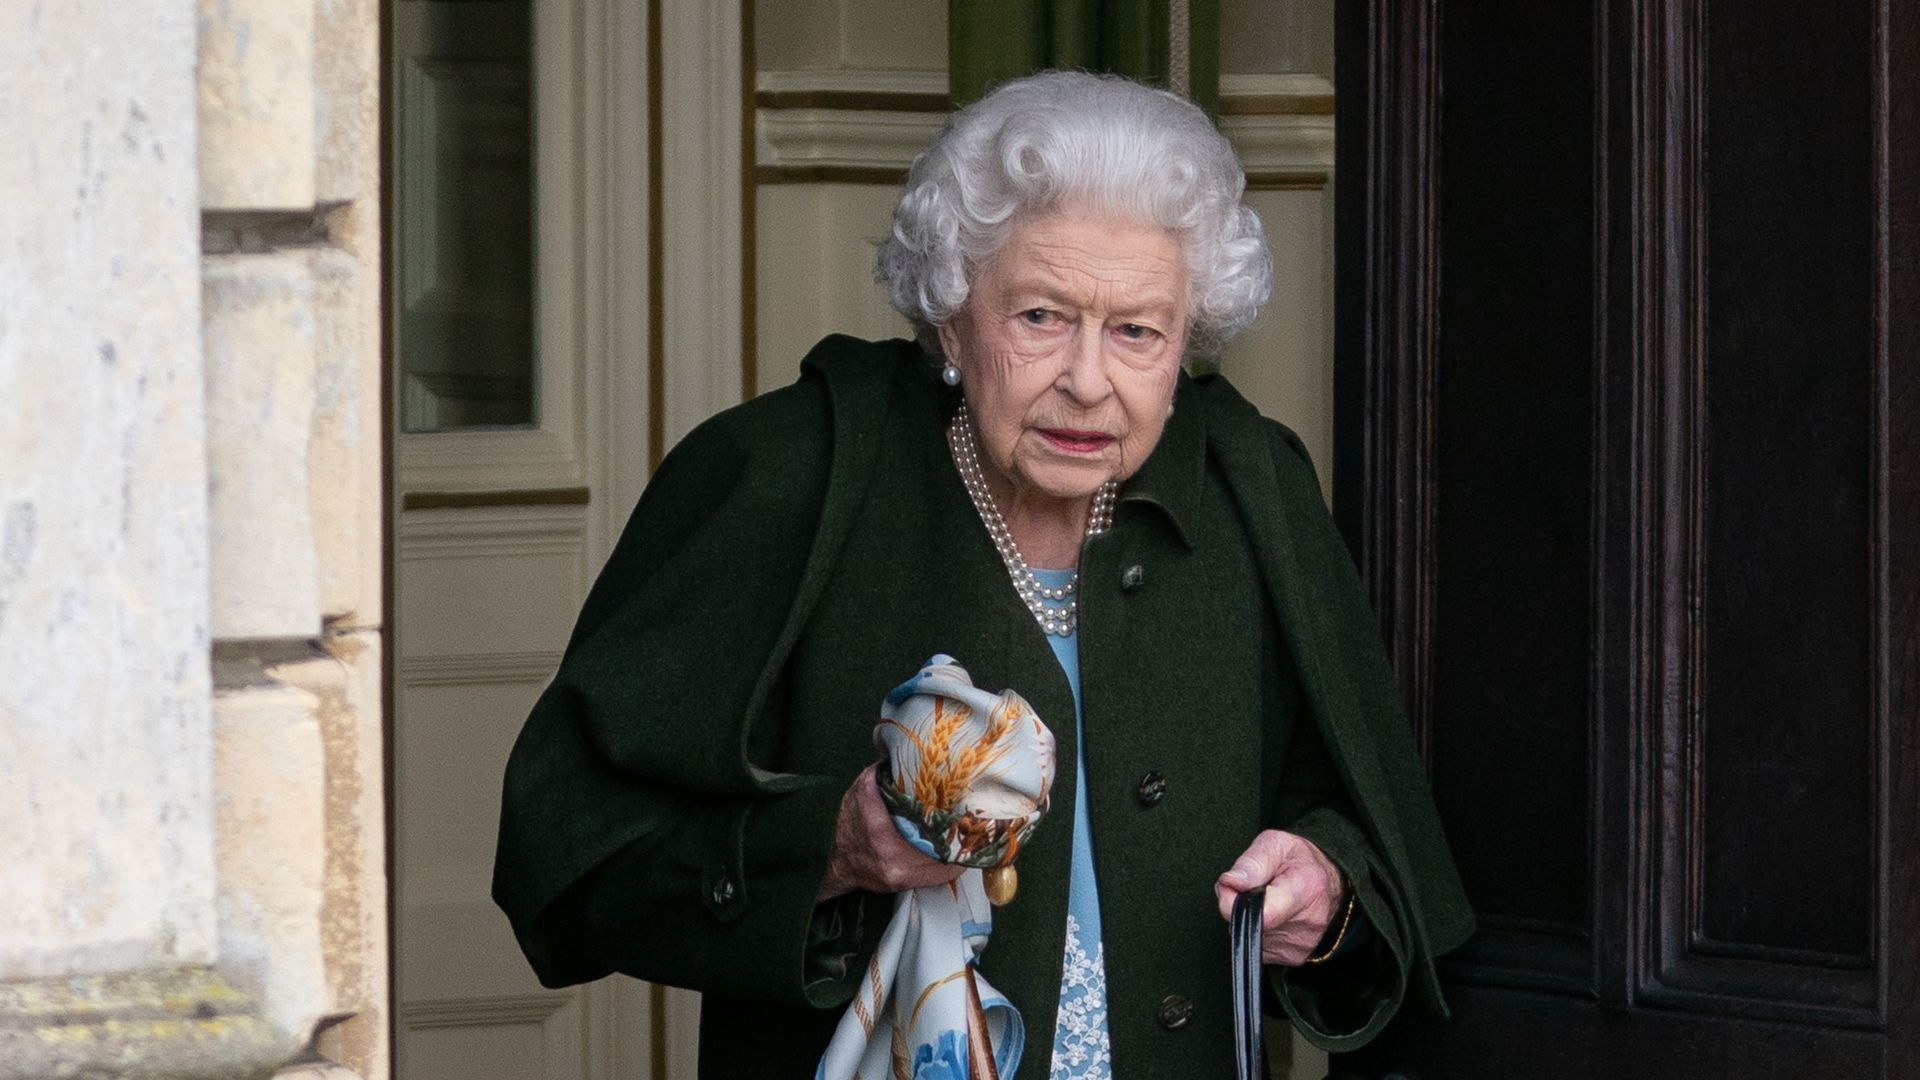 Walking issues: Can the Queen attend Philip's memorial?